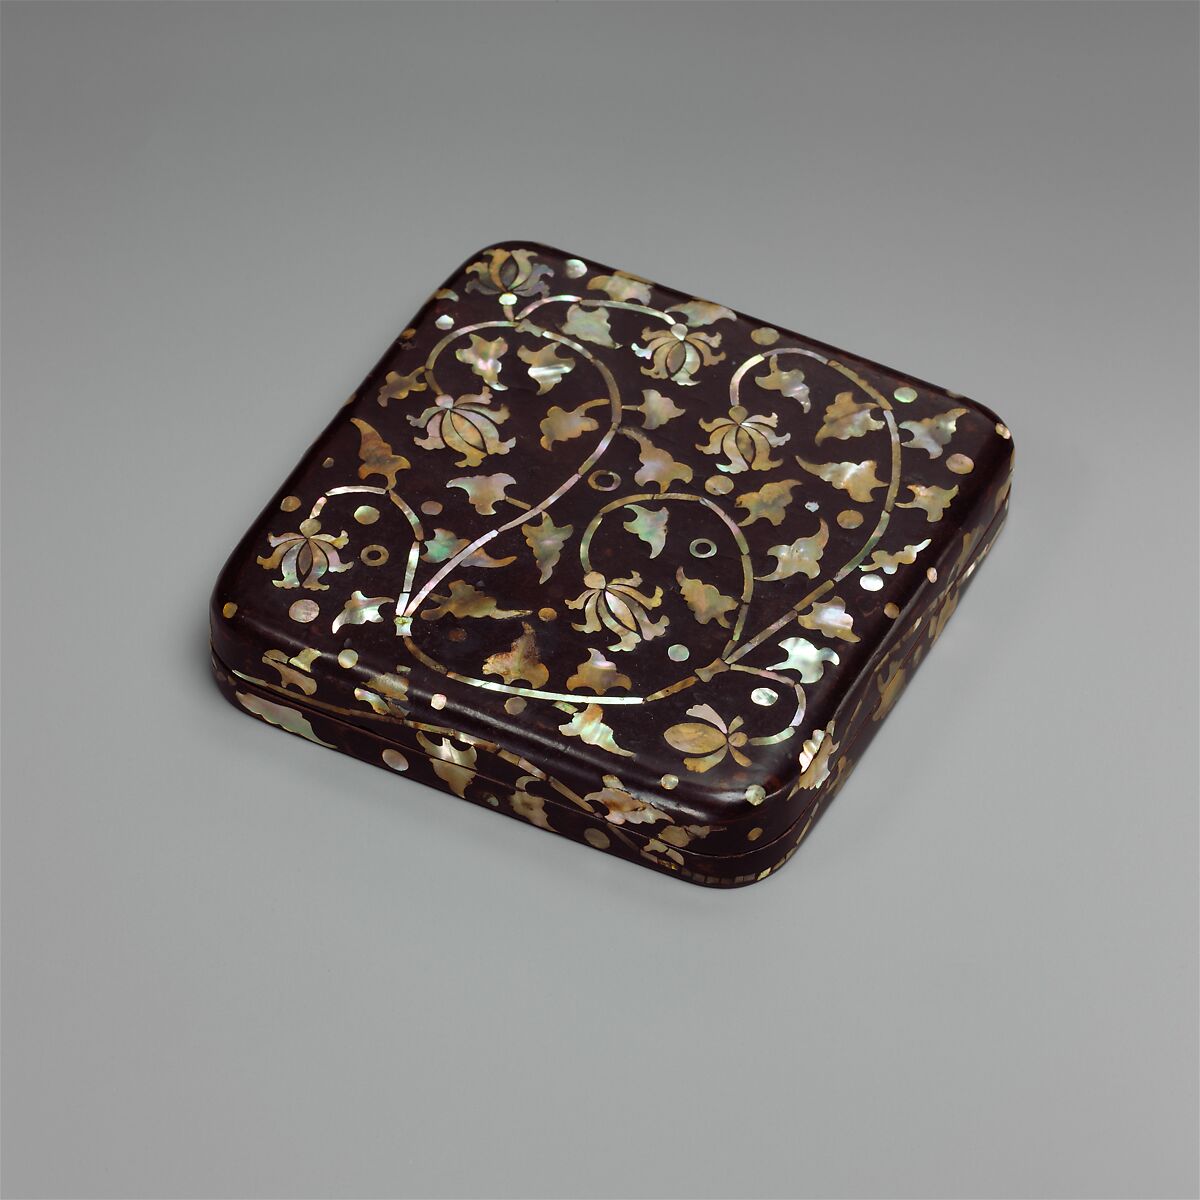 Box with decoration of peony scrolls, Lacquer inlaid with mother-of-pearl, Korea